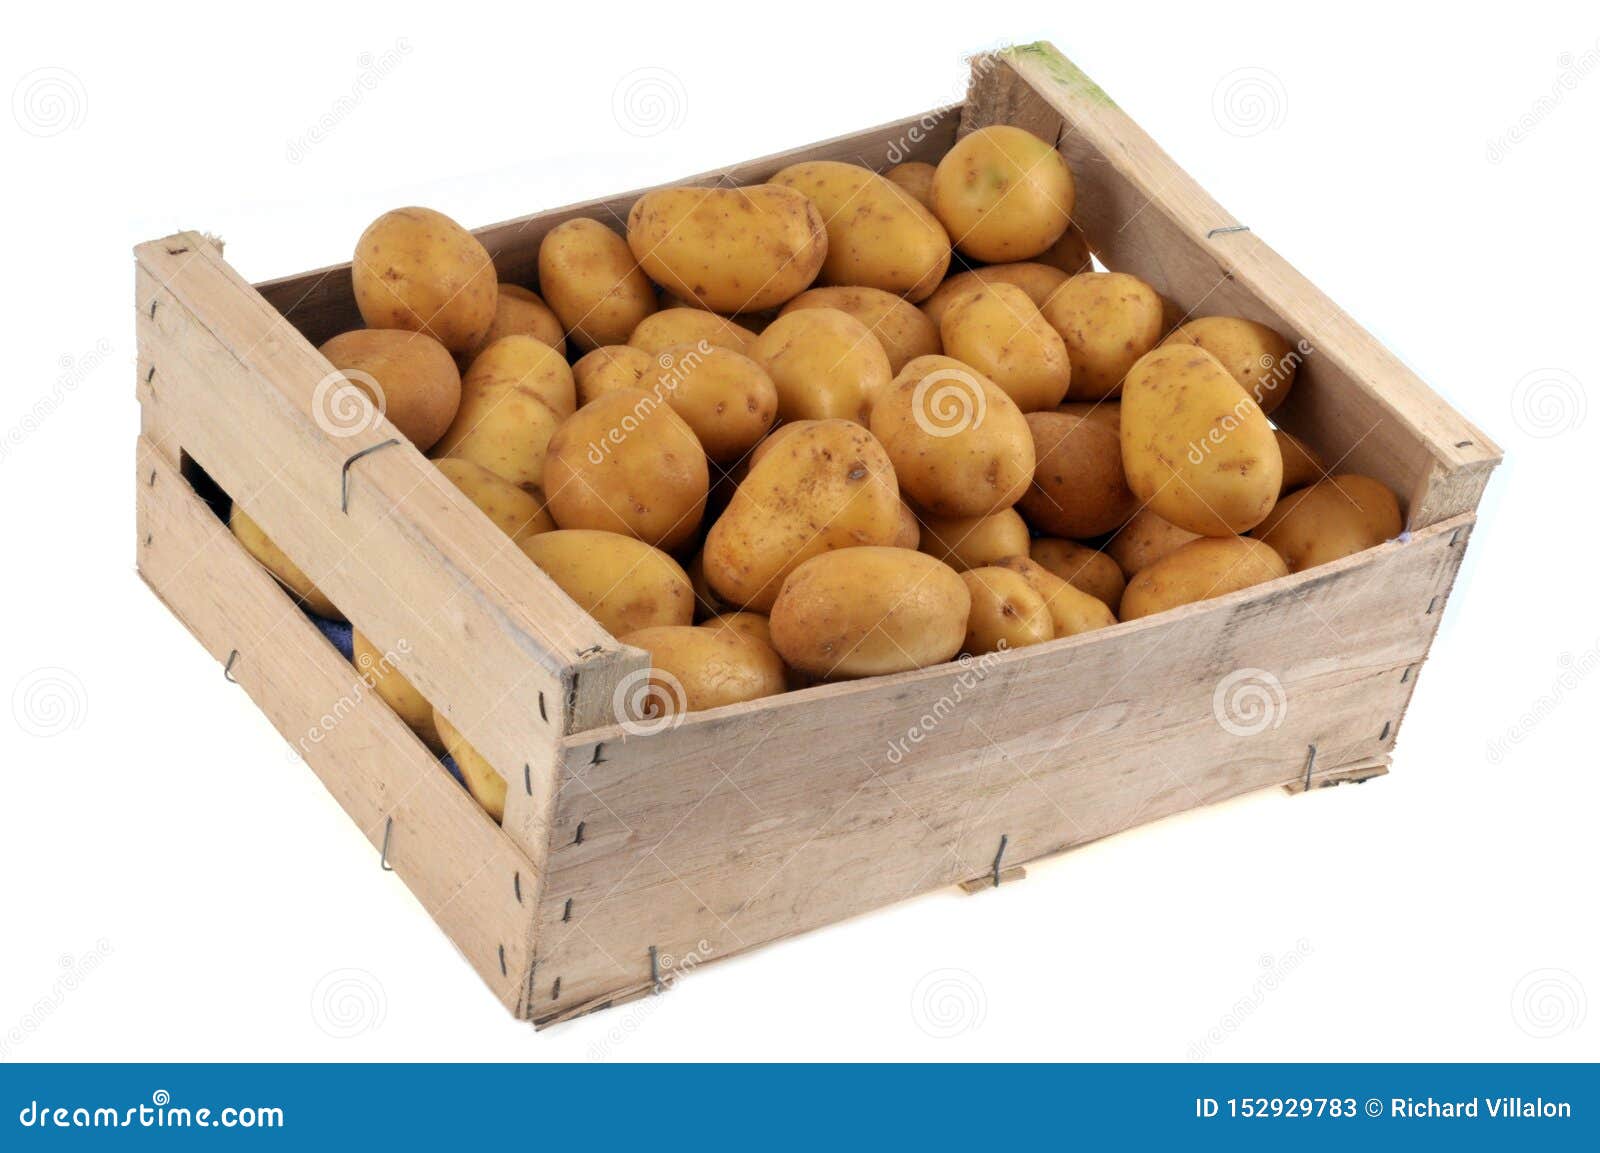 Download Wooden Crate Of Potatoes On A White Background Stock Image Image Of Isolated Closeup 152929783 Yellowimages Mockups